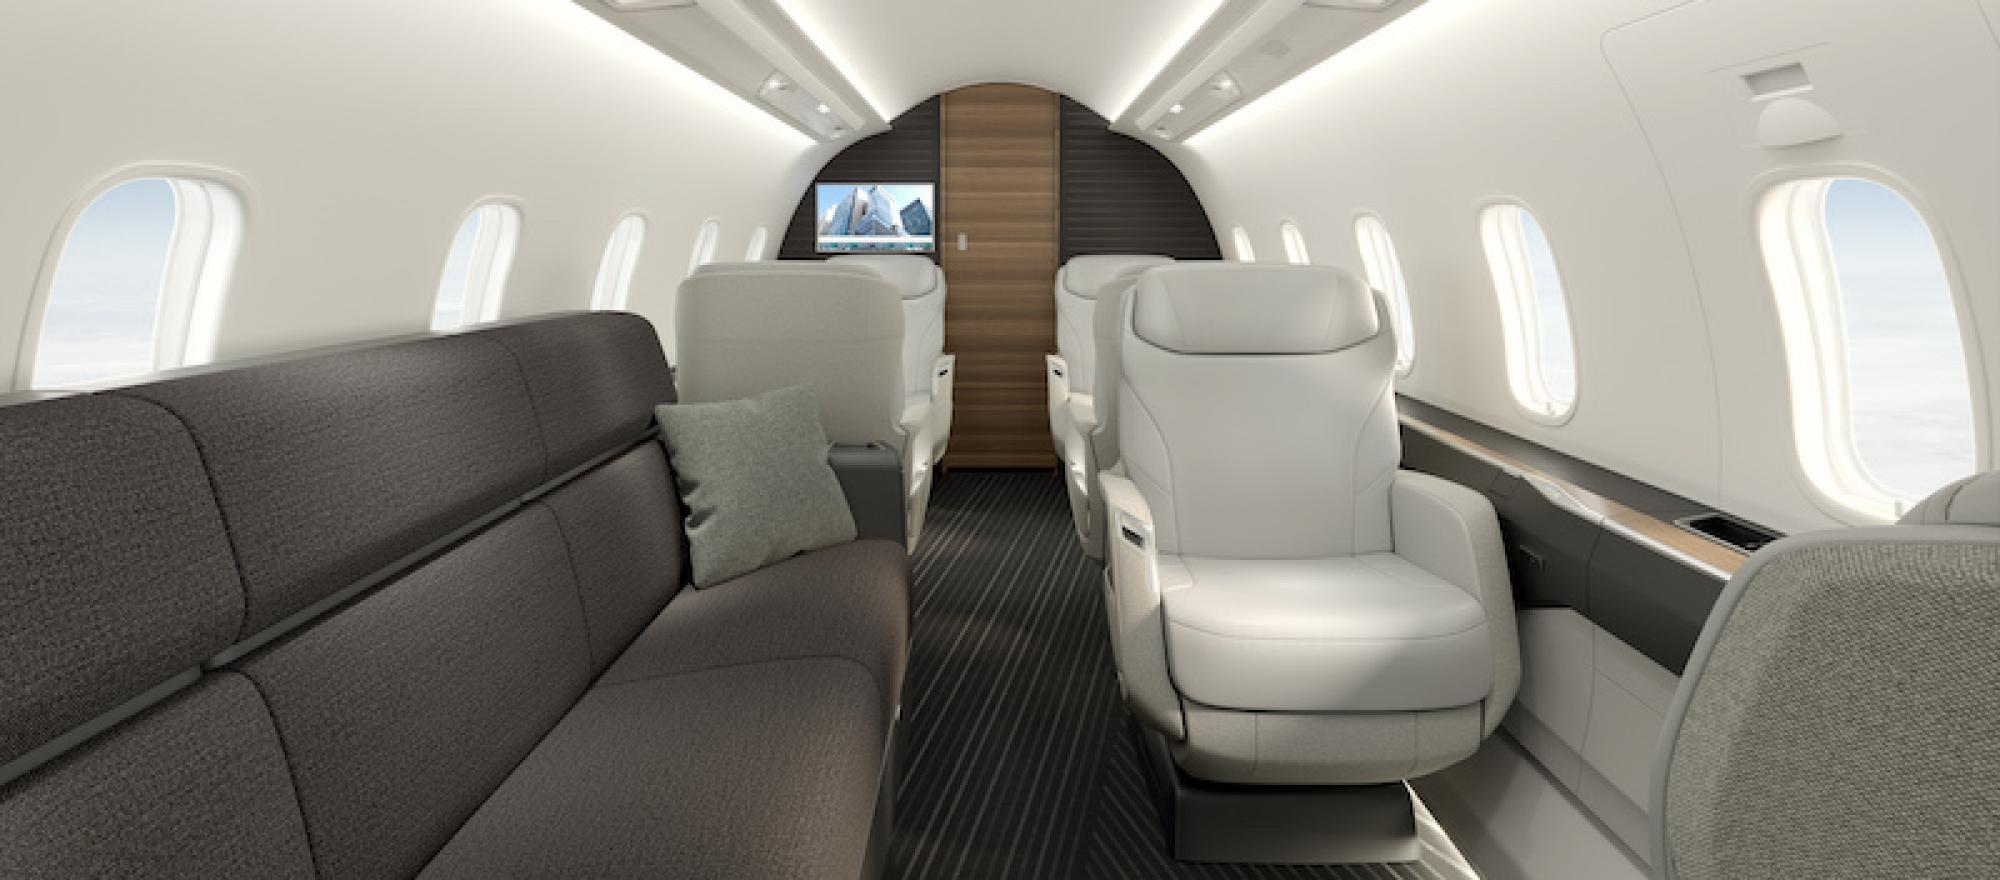 Interior cabin photo of the Challenger 3500 from divan looking forward